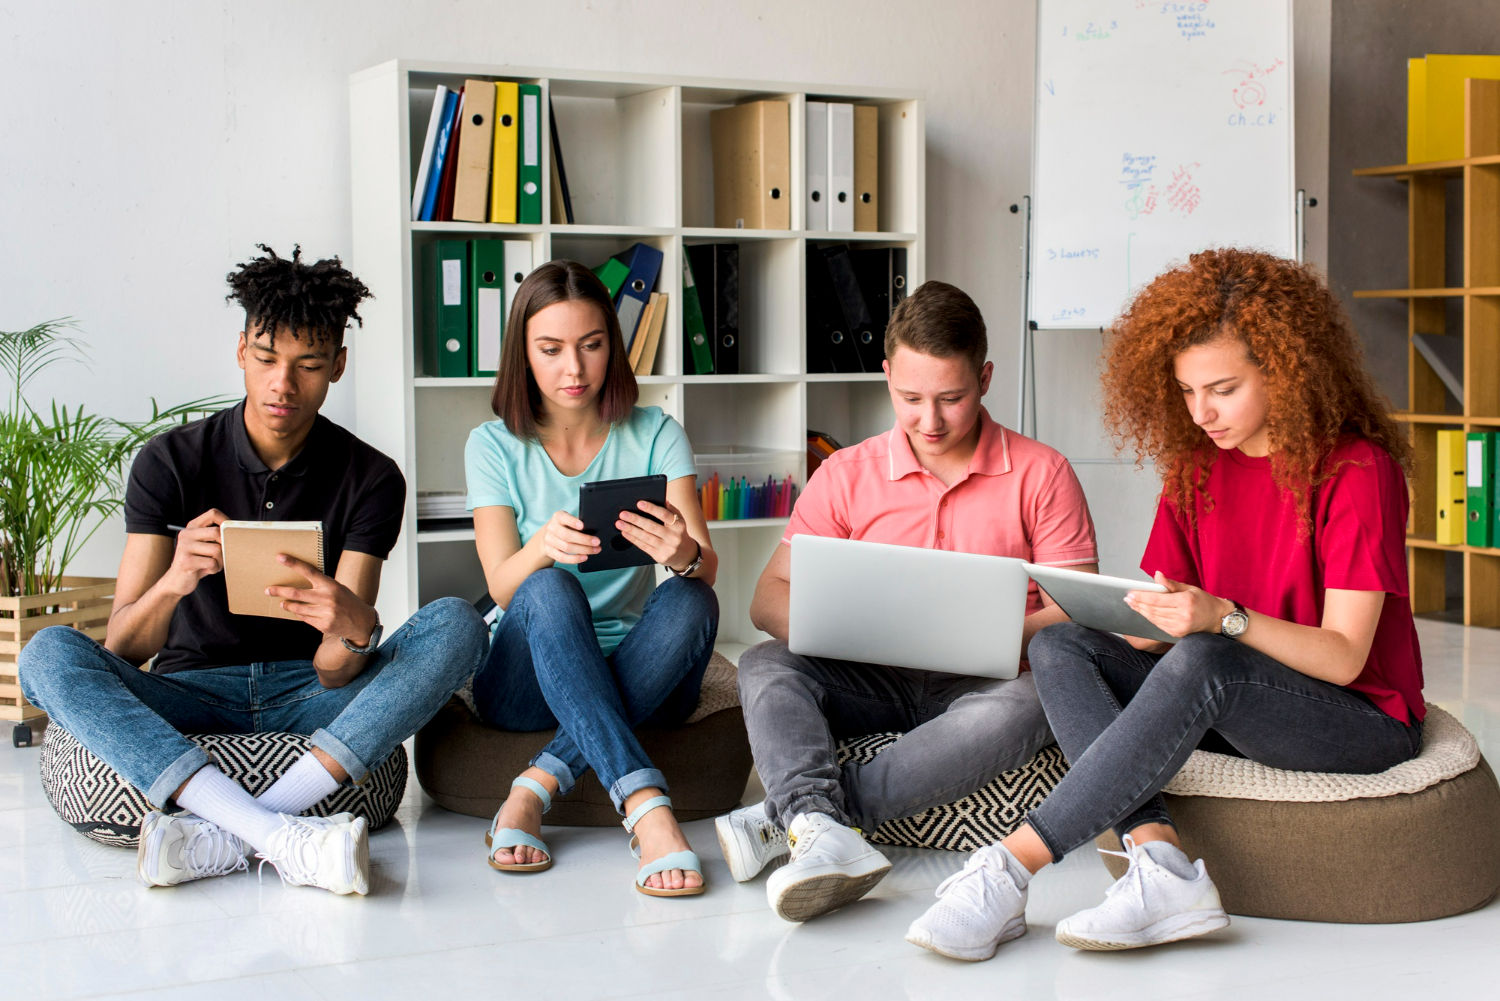 Half Of Employers Admit Gen Z Employees Lack Vital Skills And Knowledge For The Workplace